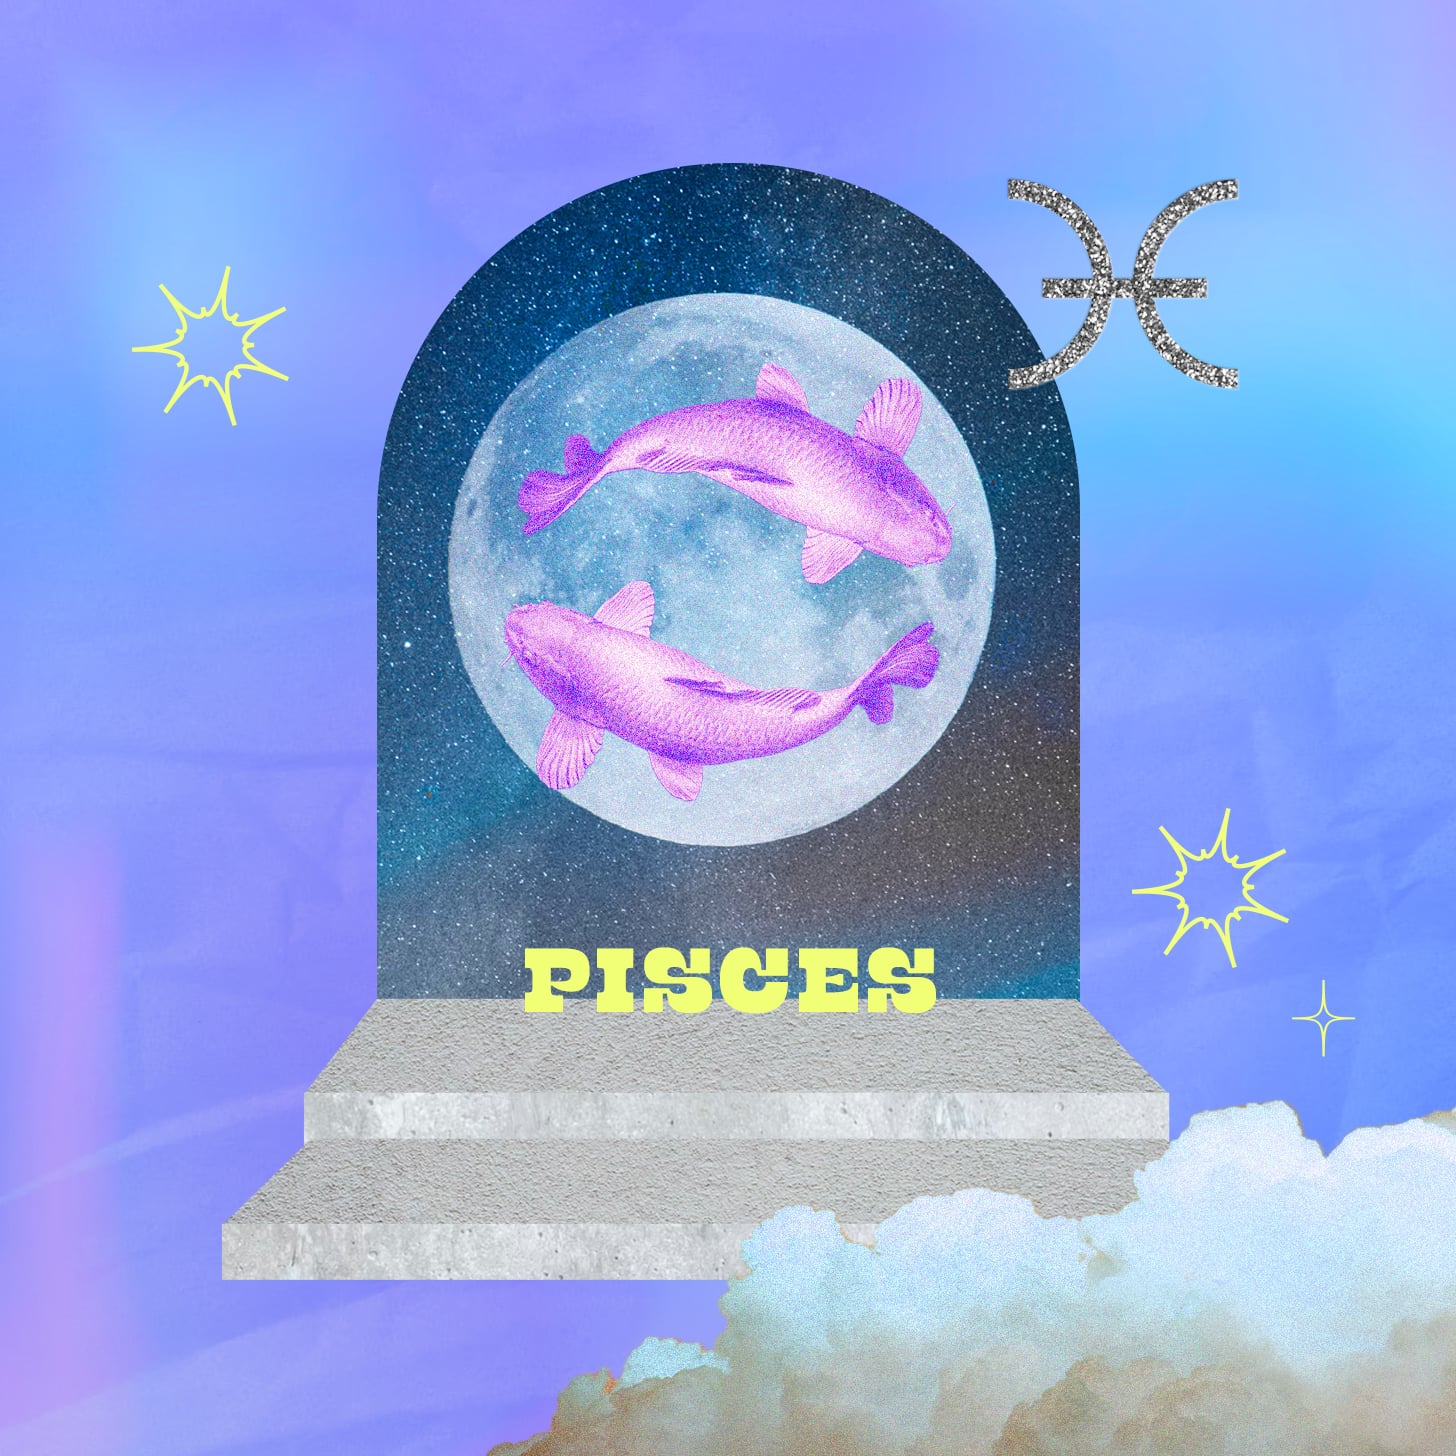 Pisces weekly horoscope for October 2, 2022